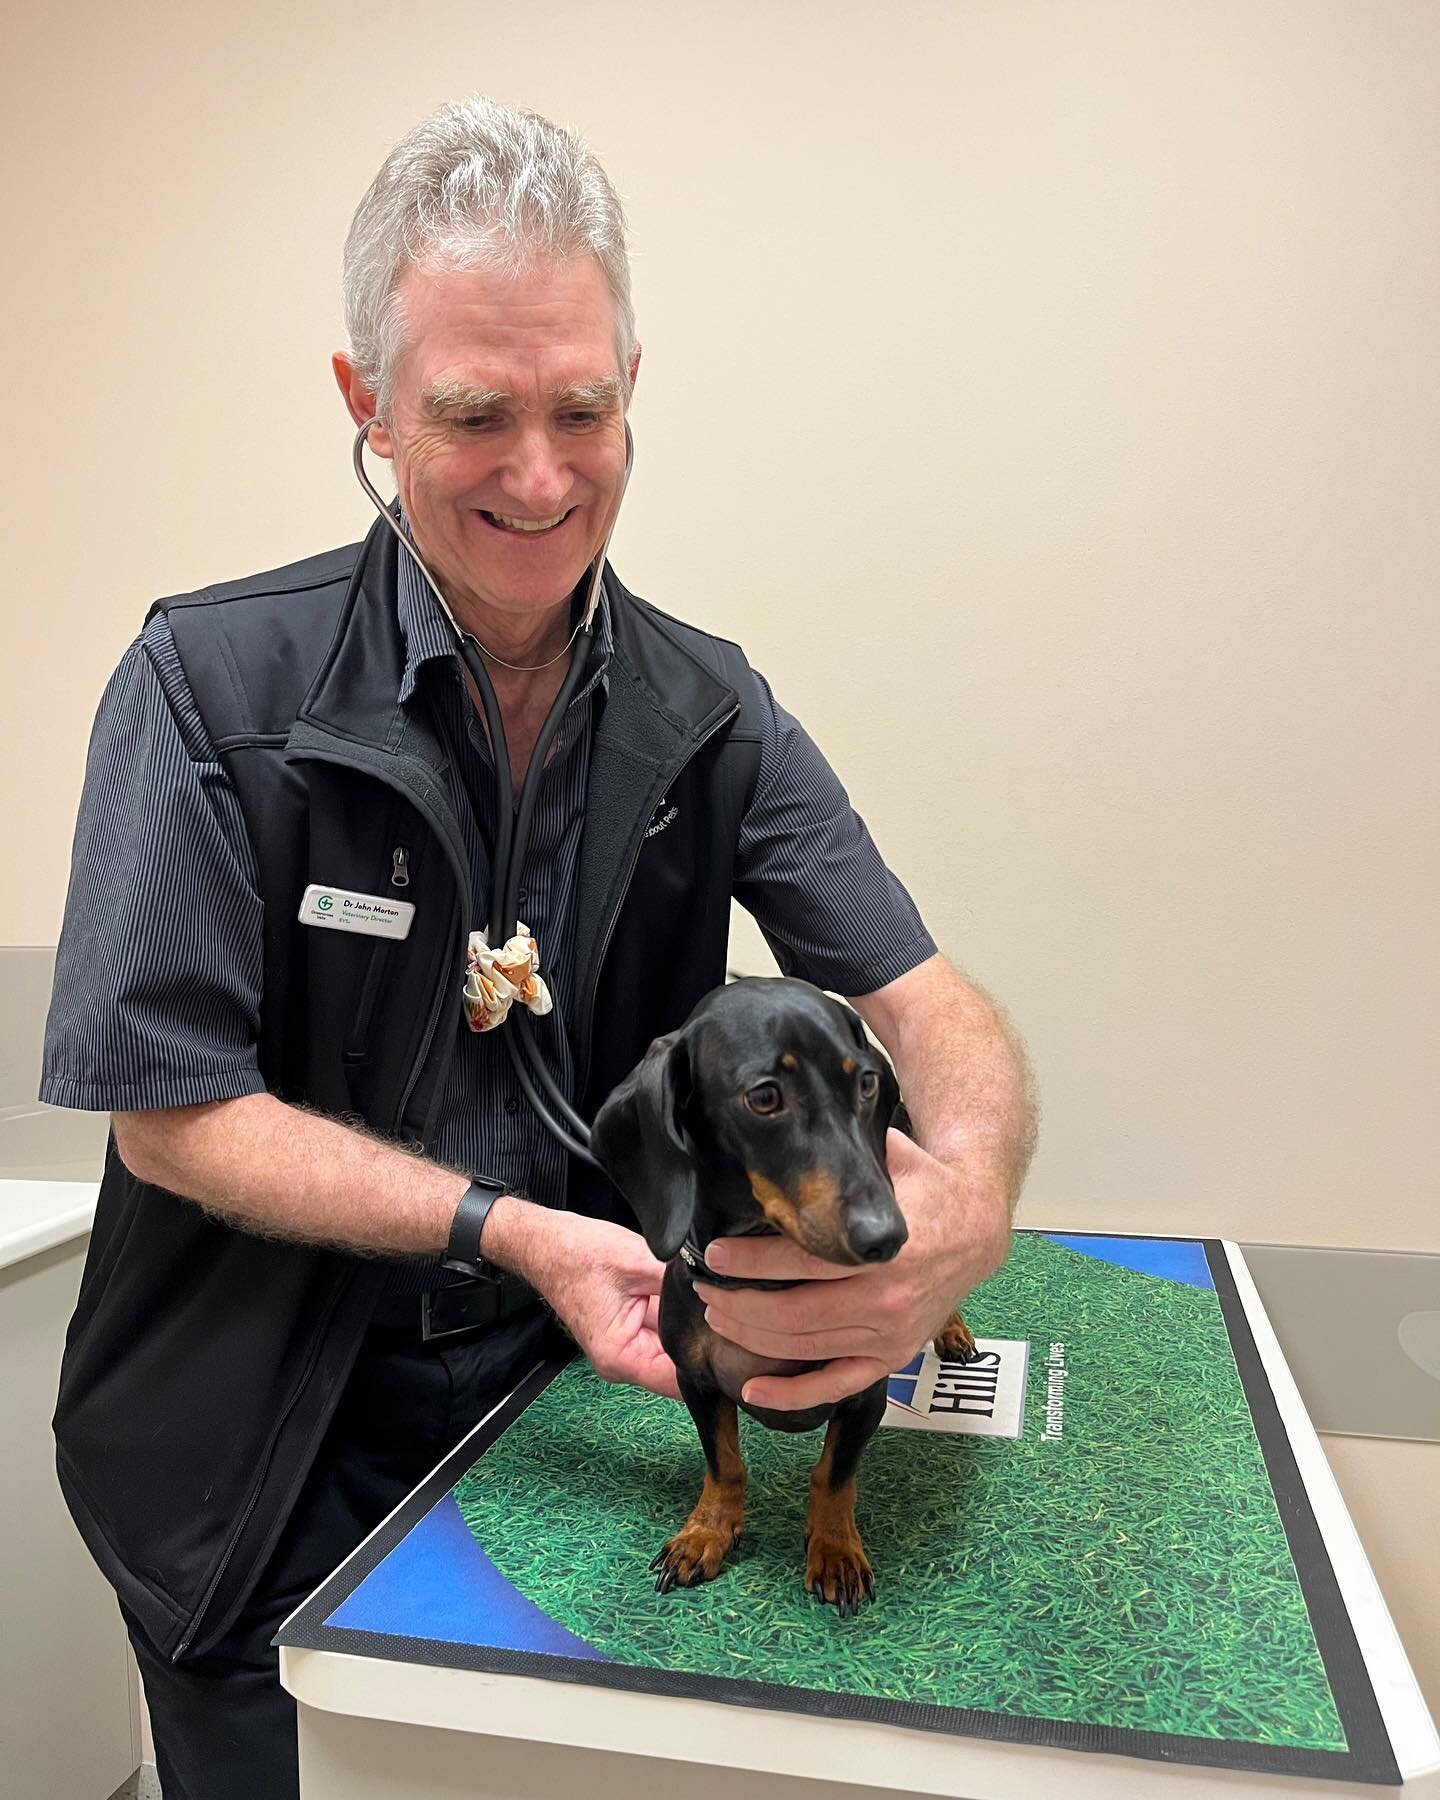 Check out BBQ (the winner of 2022's Dachshund Dash) at Greencross Vets getting his healthy pets plus check up as part of his prize. Hope you had the best time! Woof Woof. 

Don't forget to enter for this year.&nbsp;
Link via Bio.&nbsp;🐶 

@greencros